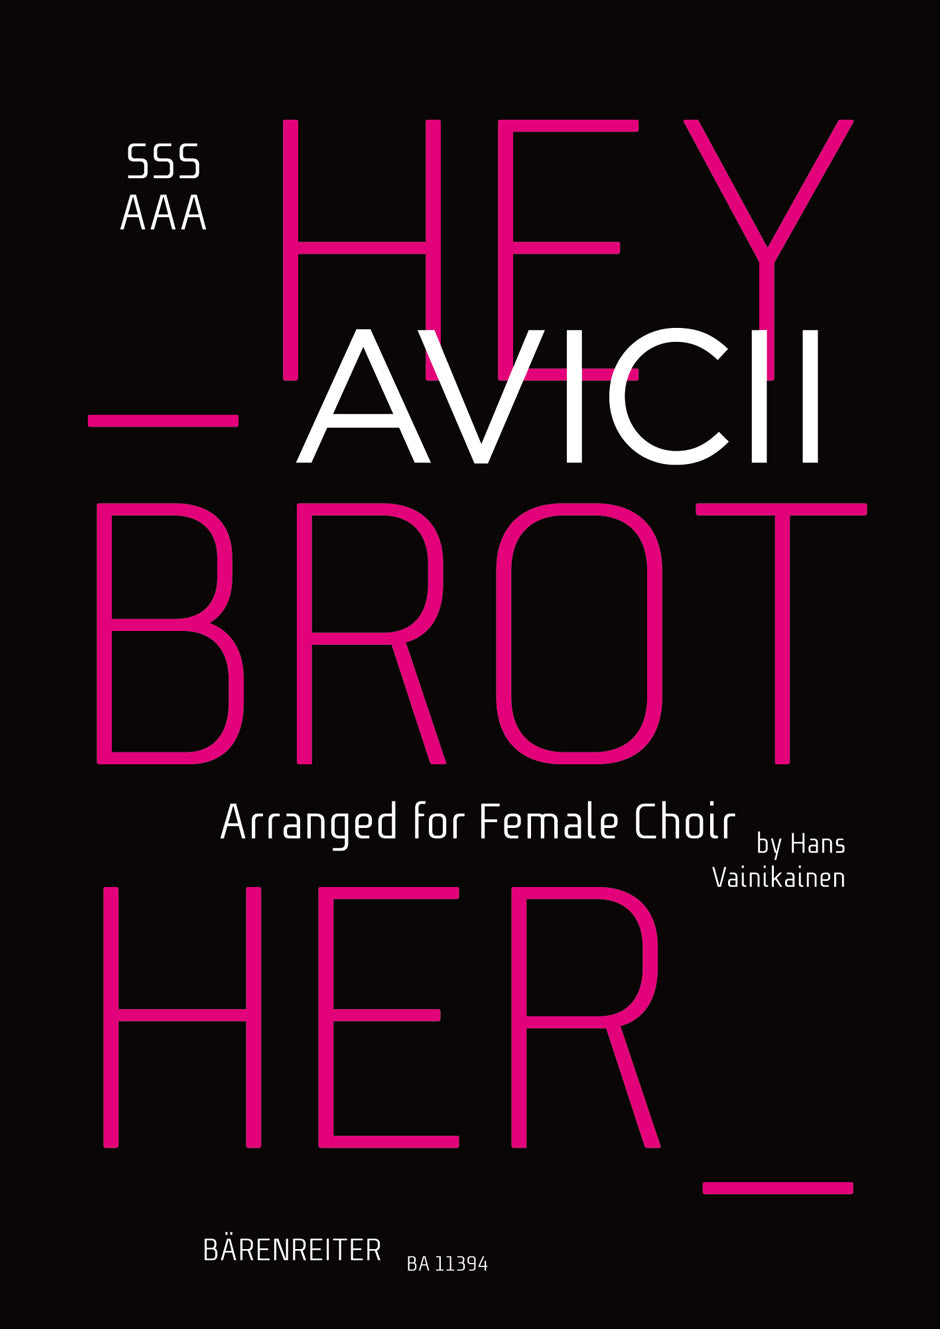 Hey Brother for female choir (SSSAAA)